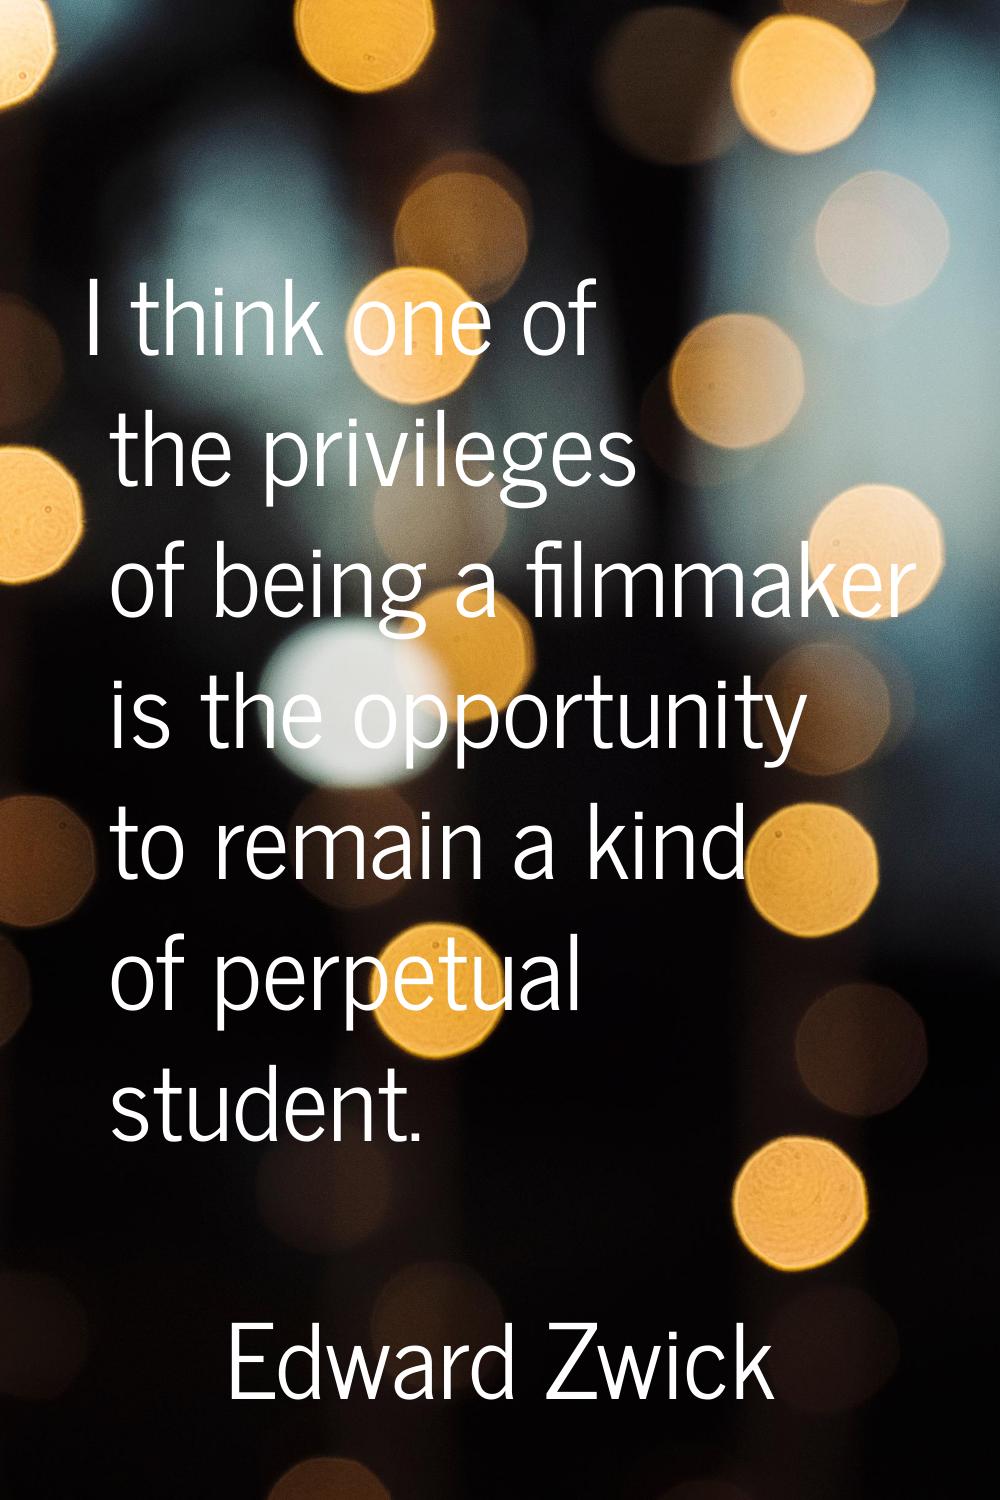 I think one of the privileges of being a filmmaker is the opportunity to remain a kind of perpetual